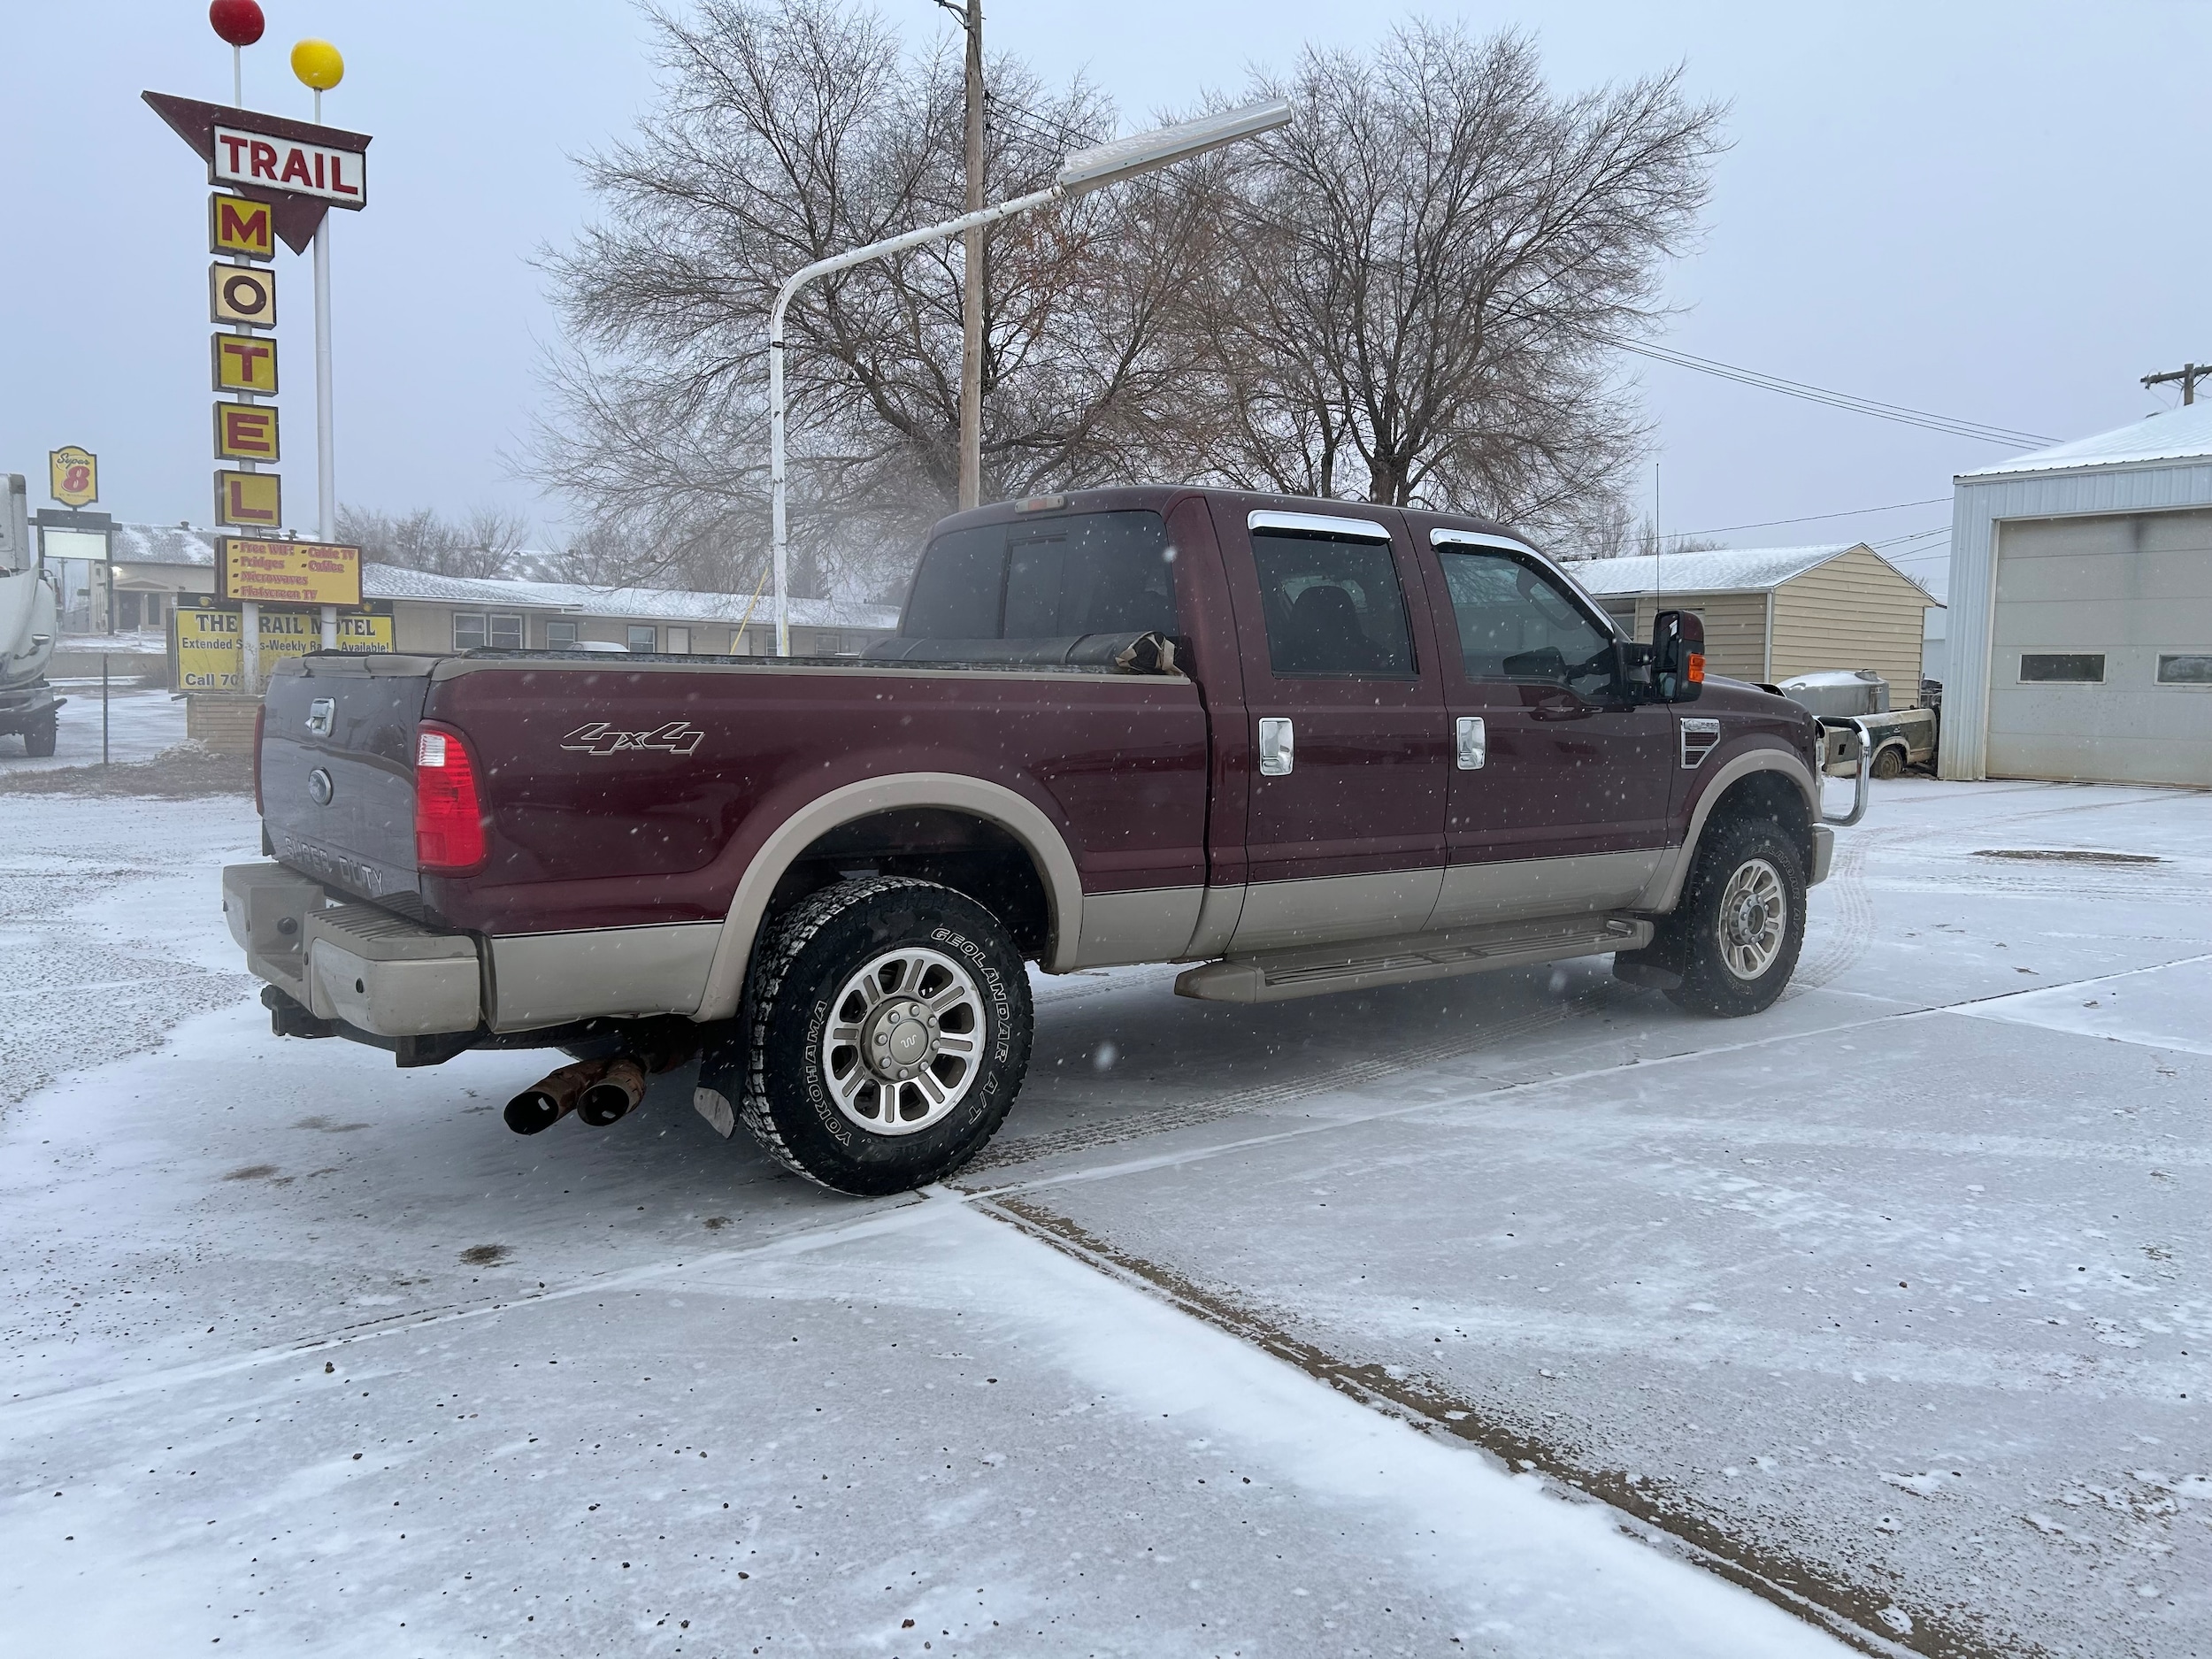 Used 2009 Ford F-250 Super Duty Lariat with VIN 1FTSW21R99EA04192 for sale in Bowman, ND